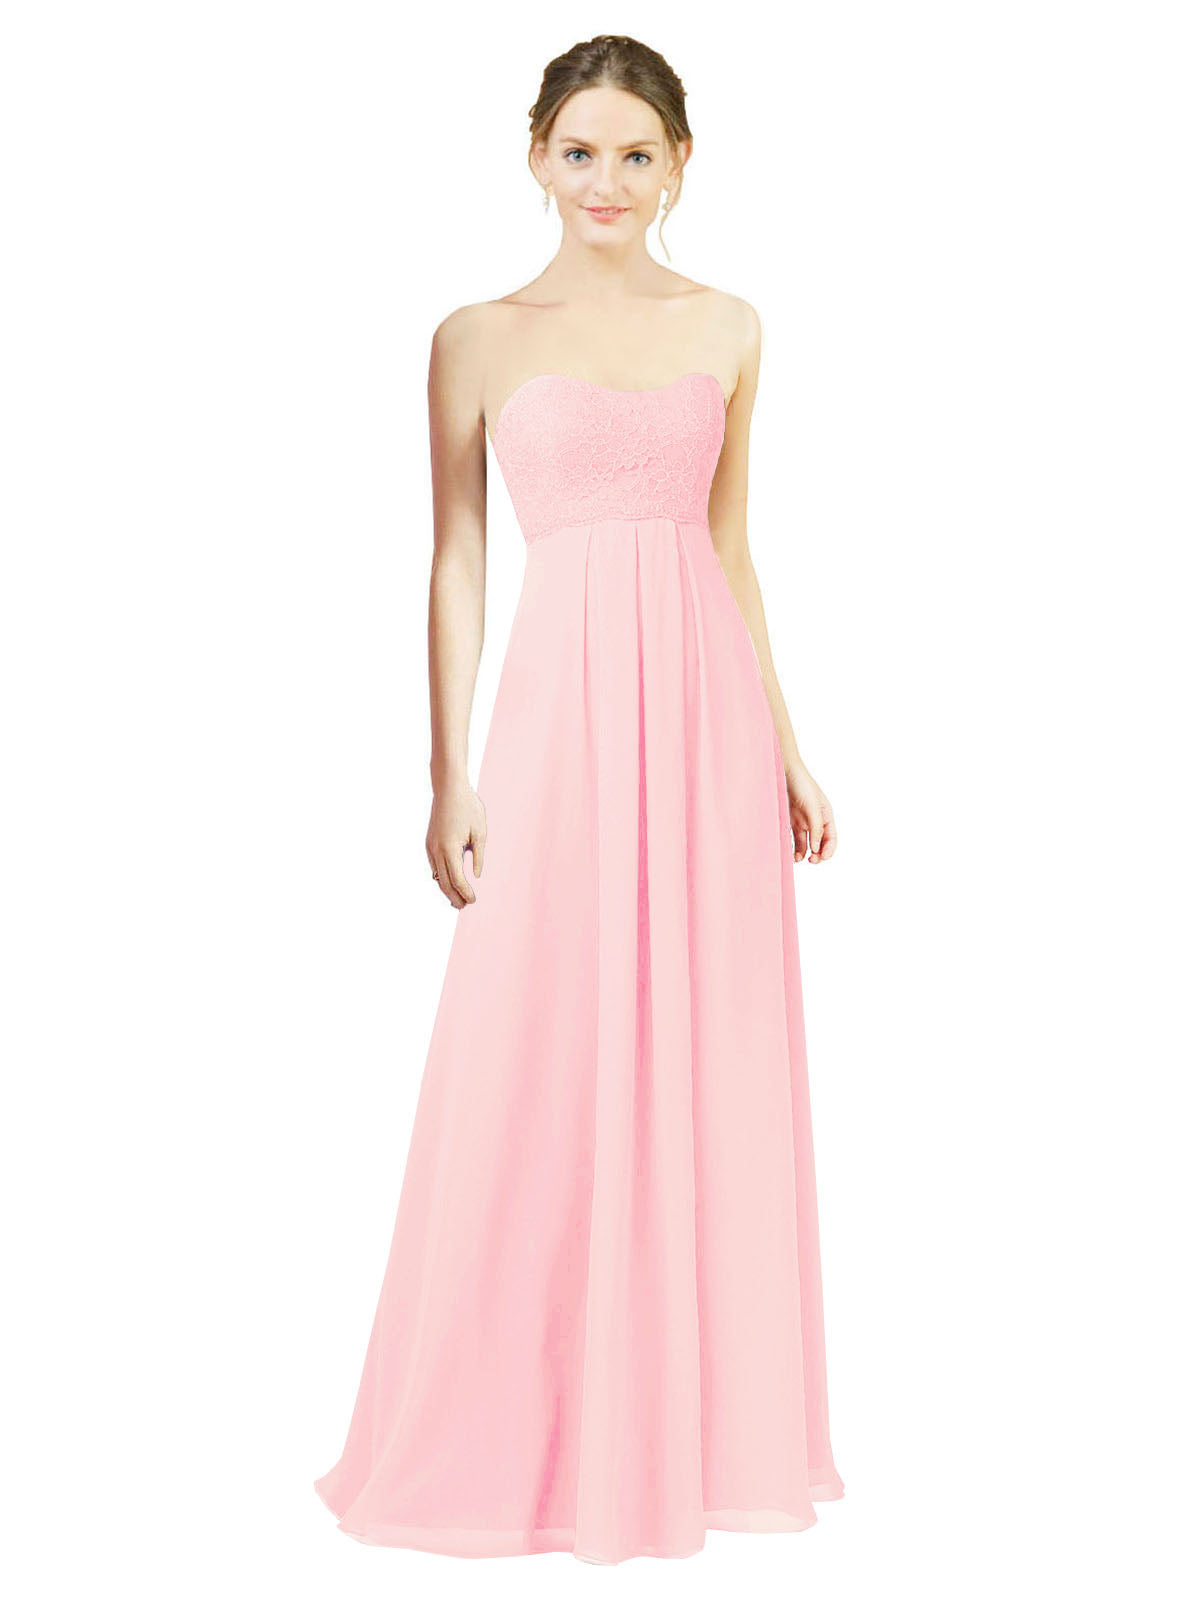 Pink A-Line Sweetheart Strapless Long Bridesmaid Dress Melany